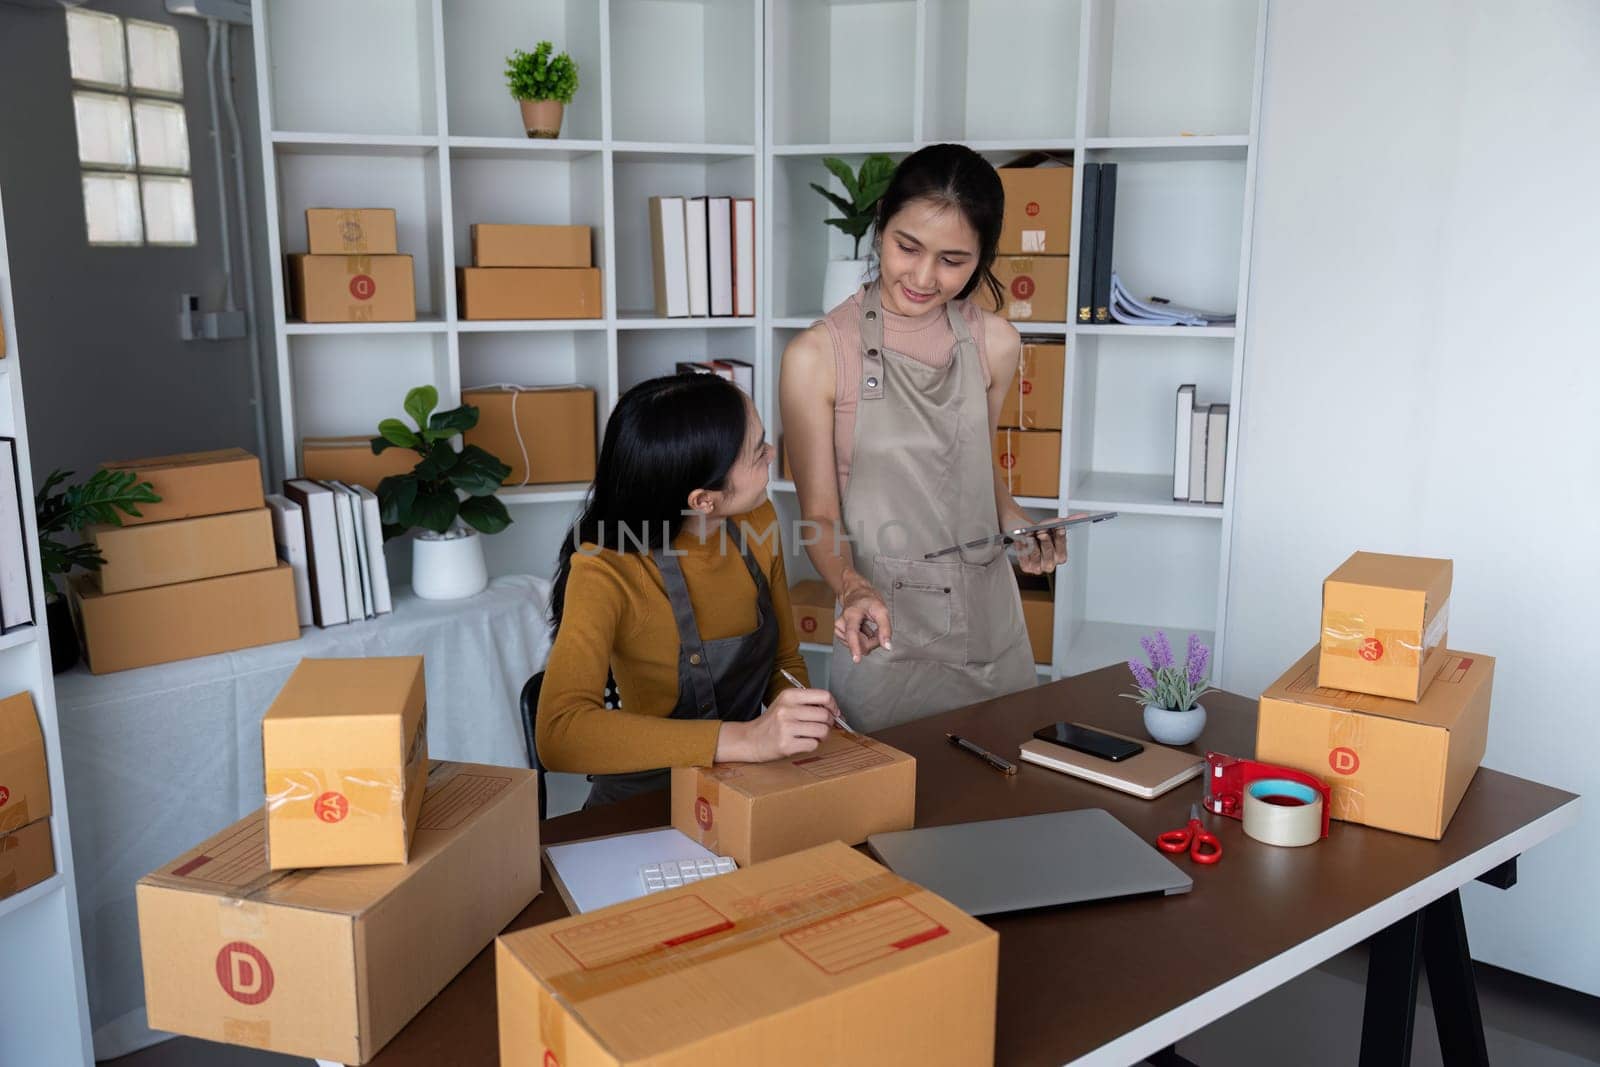 Asian women managing online store inventory and shipping orders. Concept of e-commerce business, teamwork, and logistics.